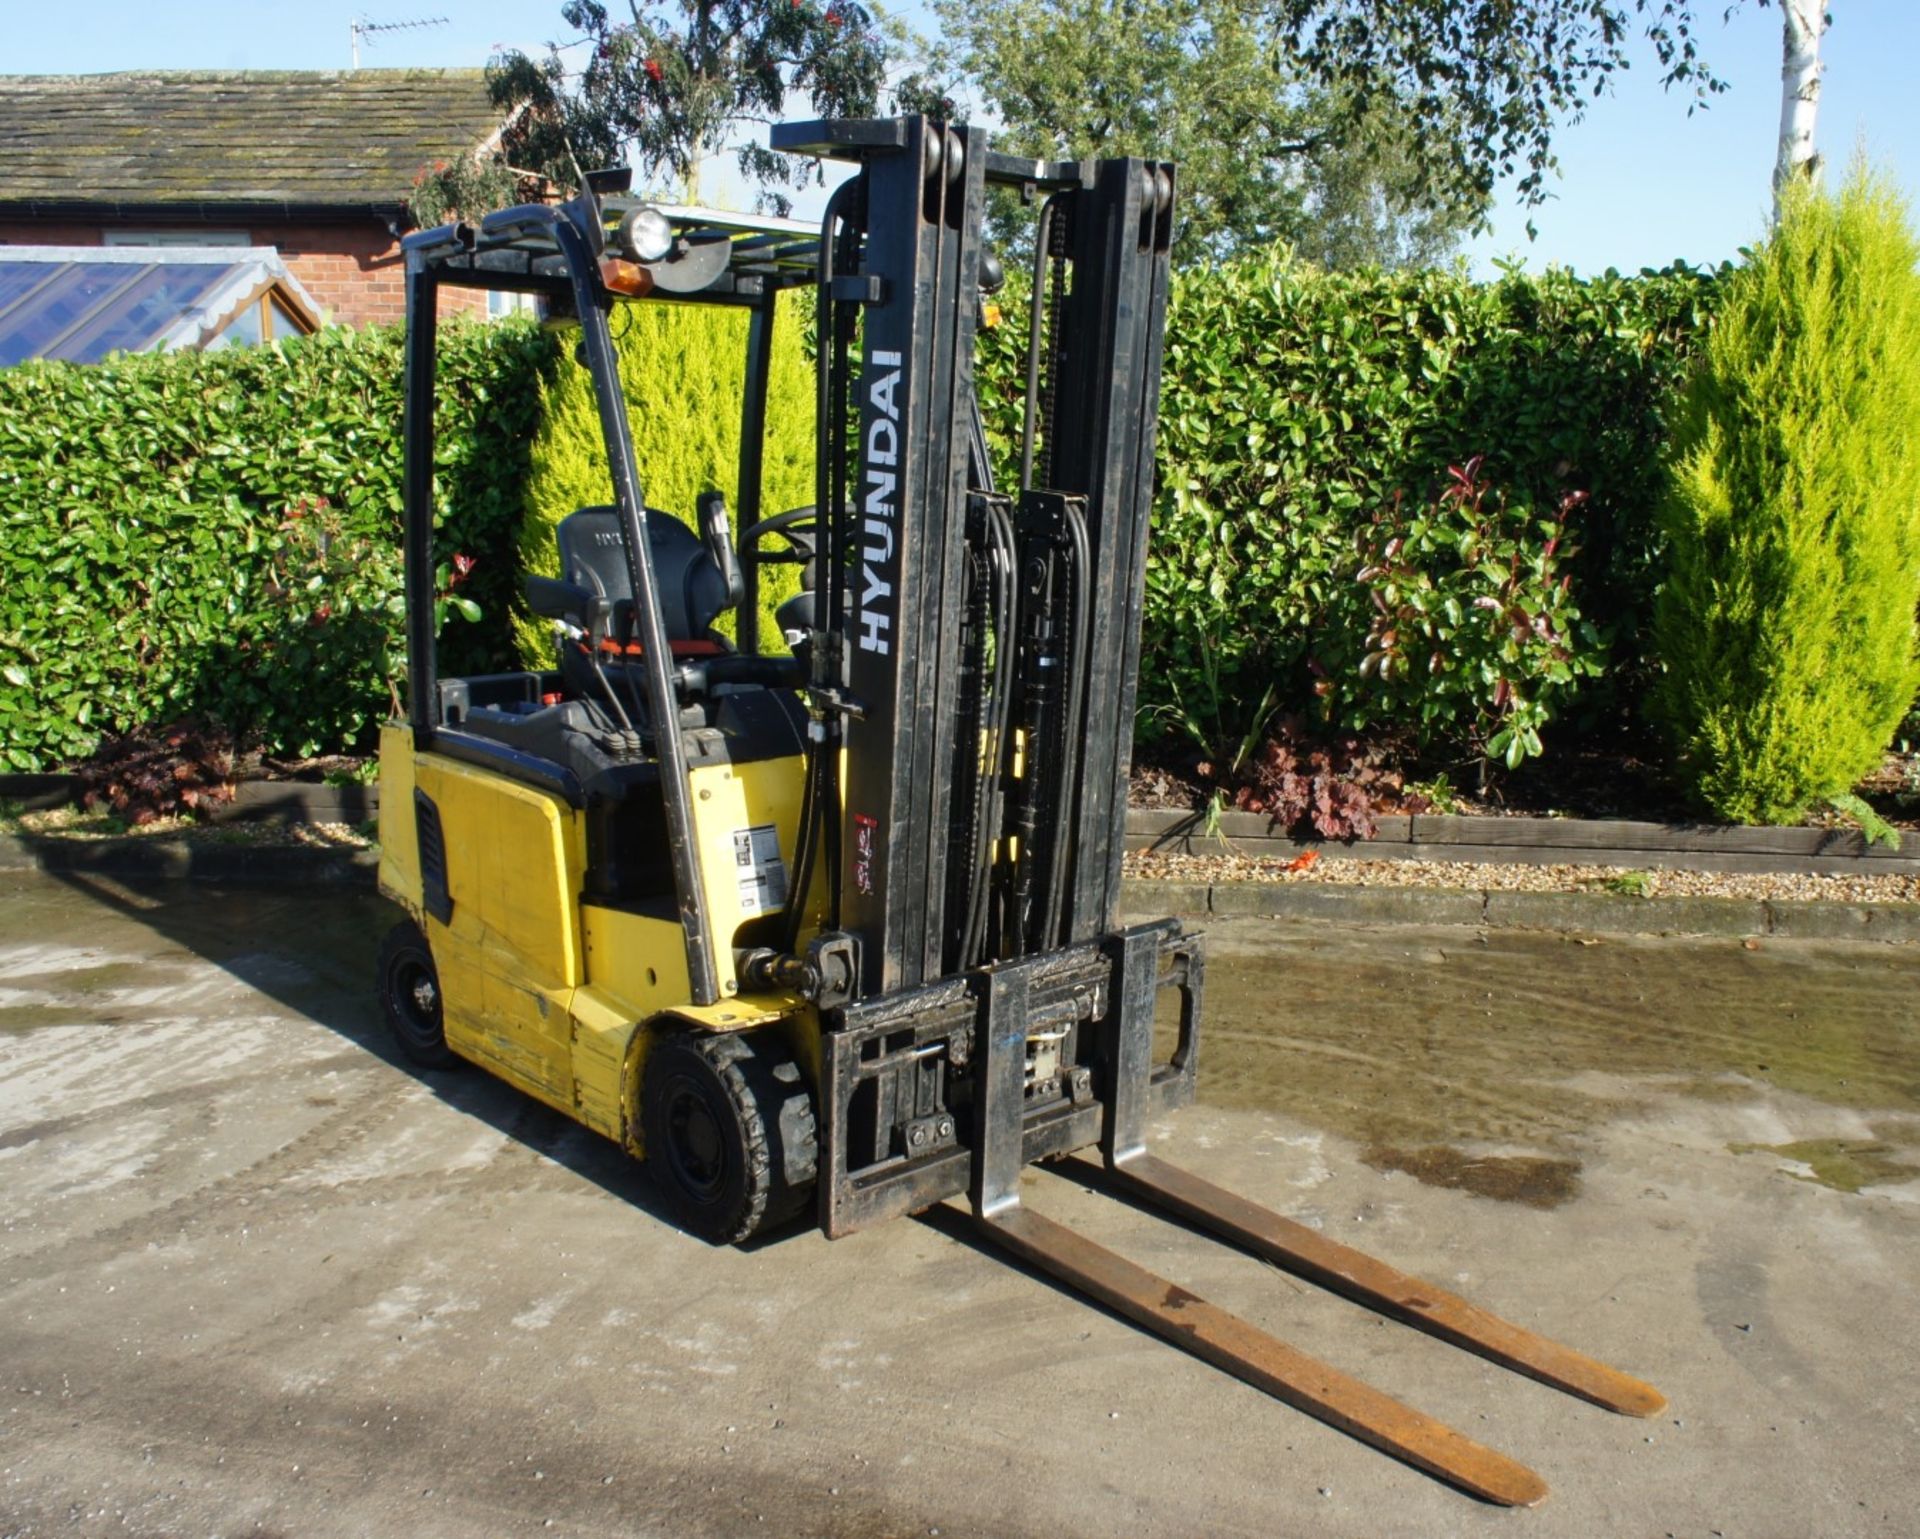 2016 Hyundai 16B-9 Electric Forklift, 1370kg rated capacity, container spec triple mast, 4750mm lift